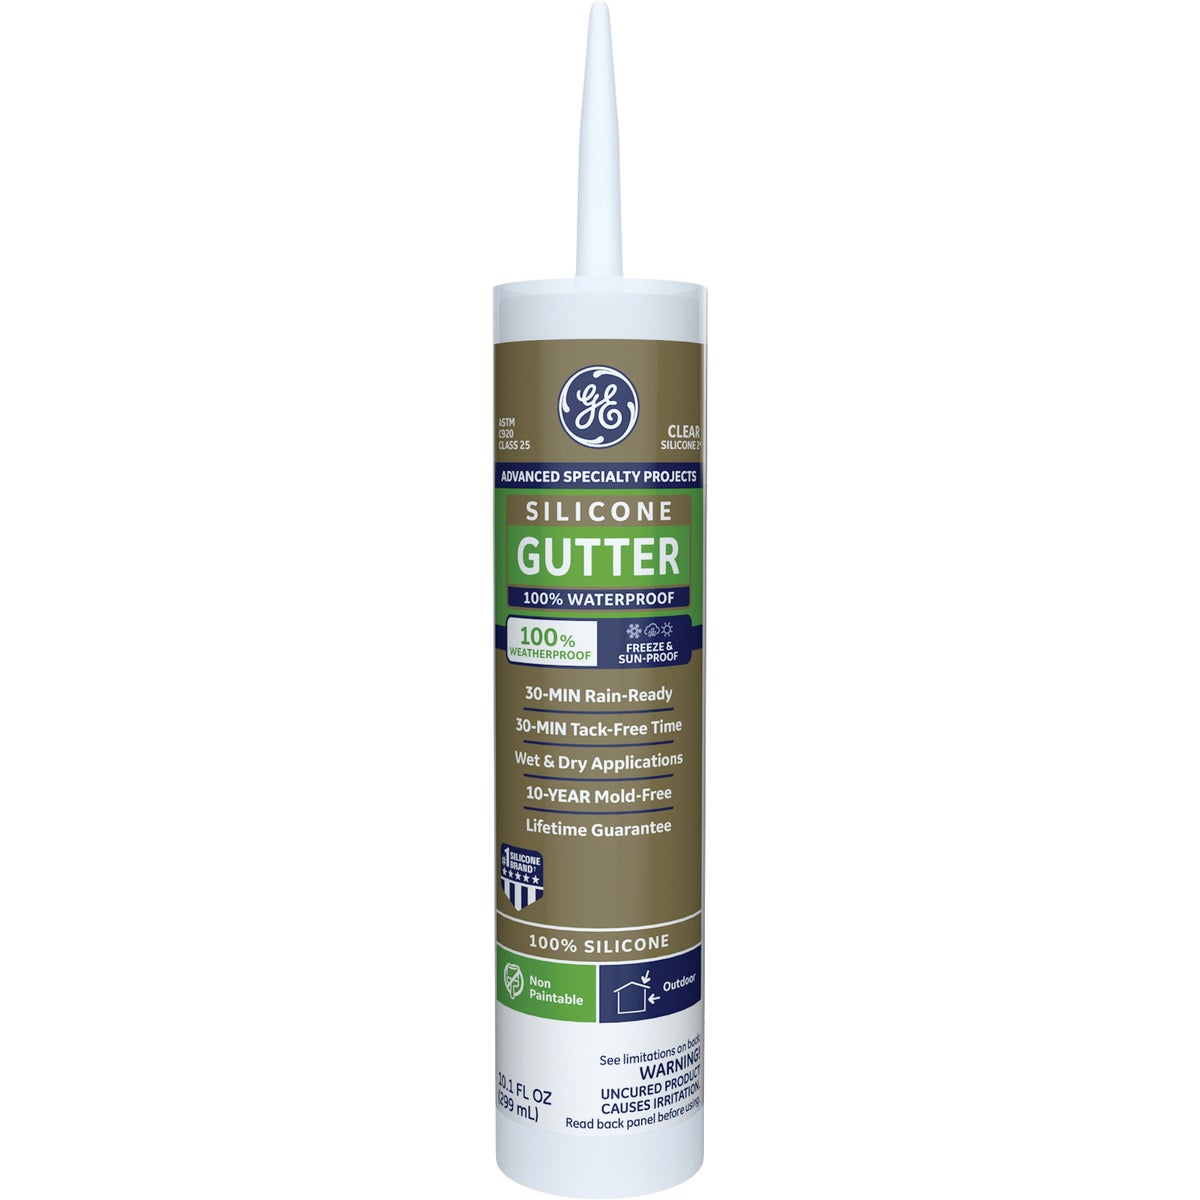 Item 790123, GE Gutter sealant is a high-performance, 100% silicone and 100% waterproof 